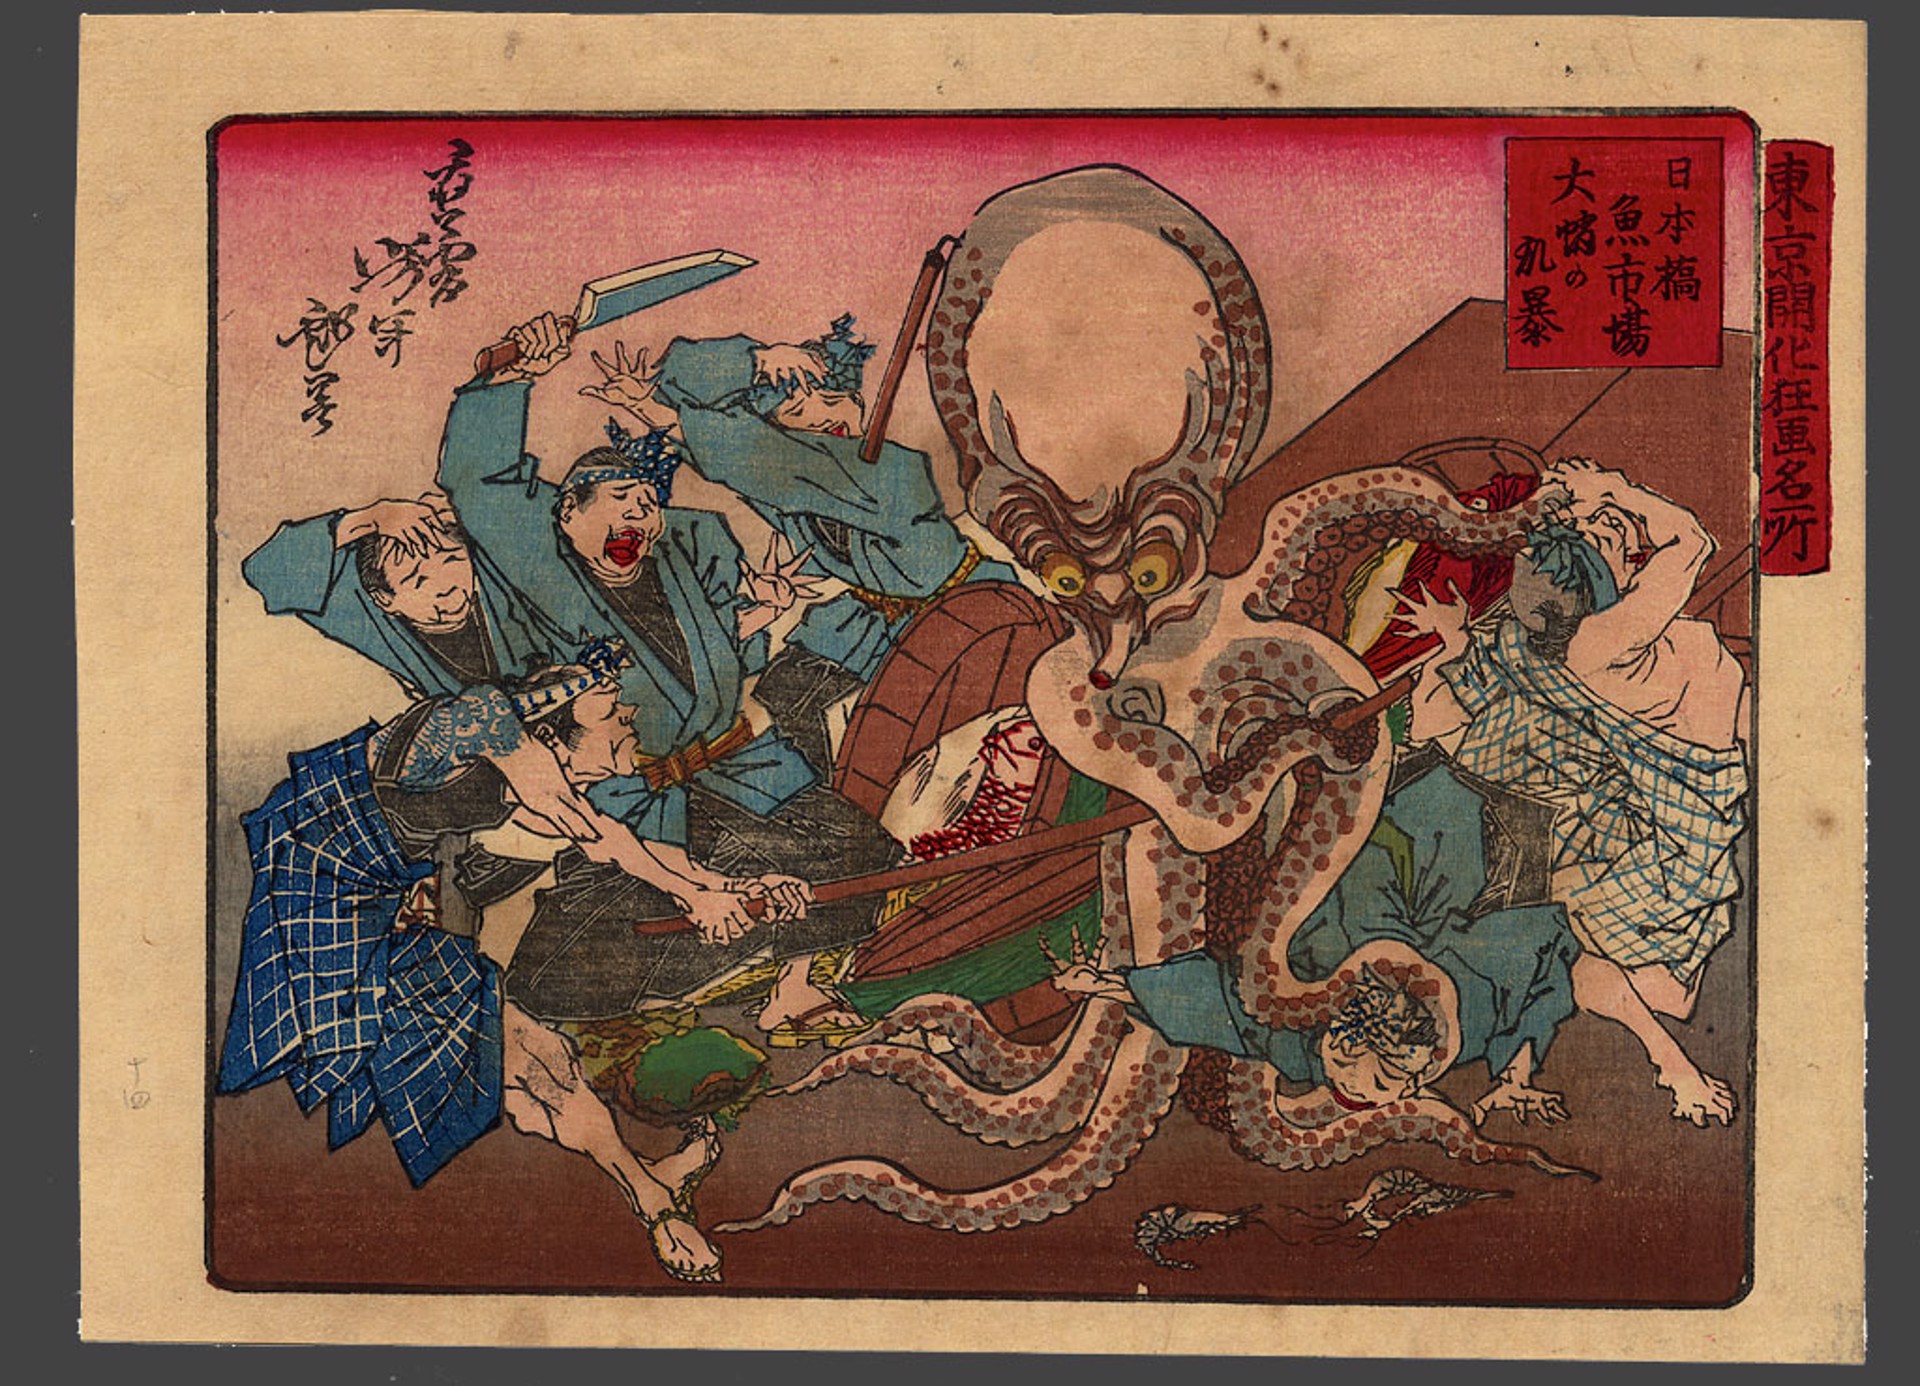 A giant octopus fights all comers at the Nihombashi Fish Market Comic pictures of famous places amid the civiization of Tokyo by Yoshitoshi